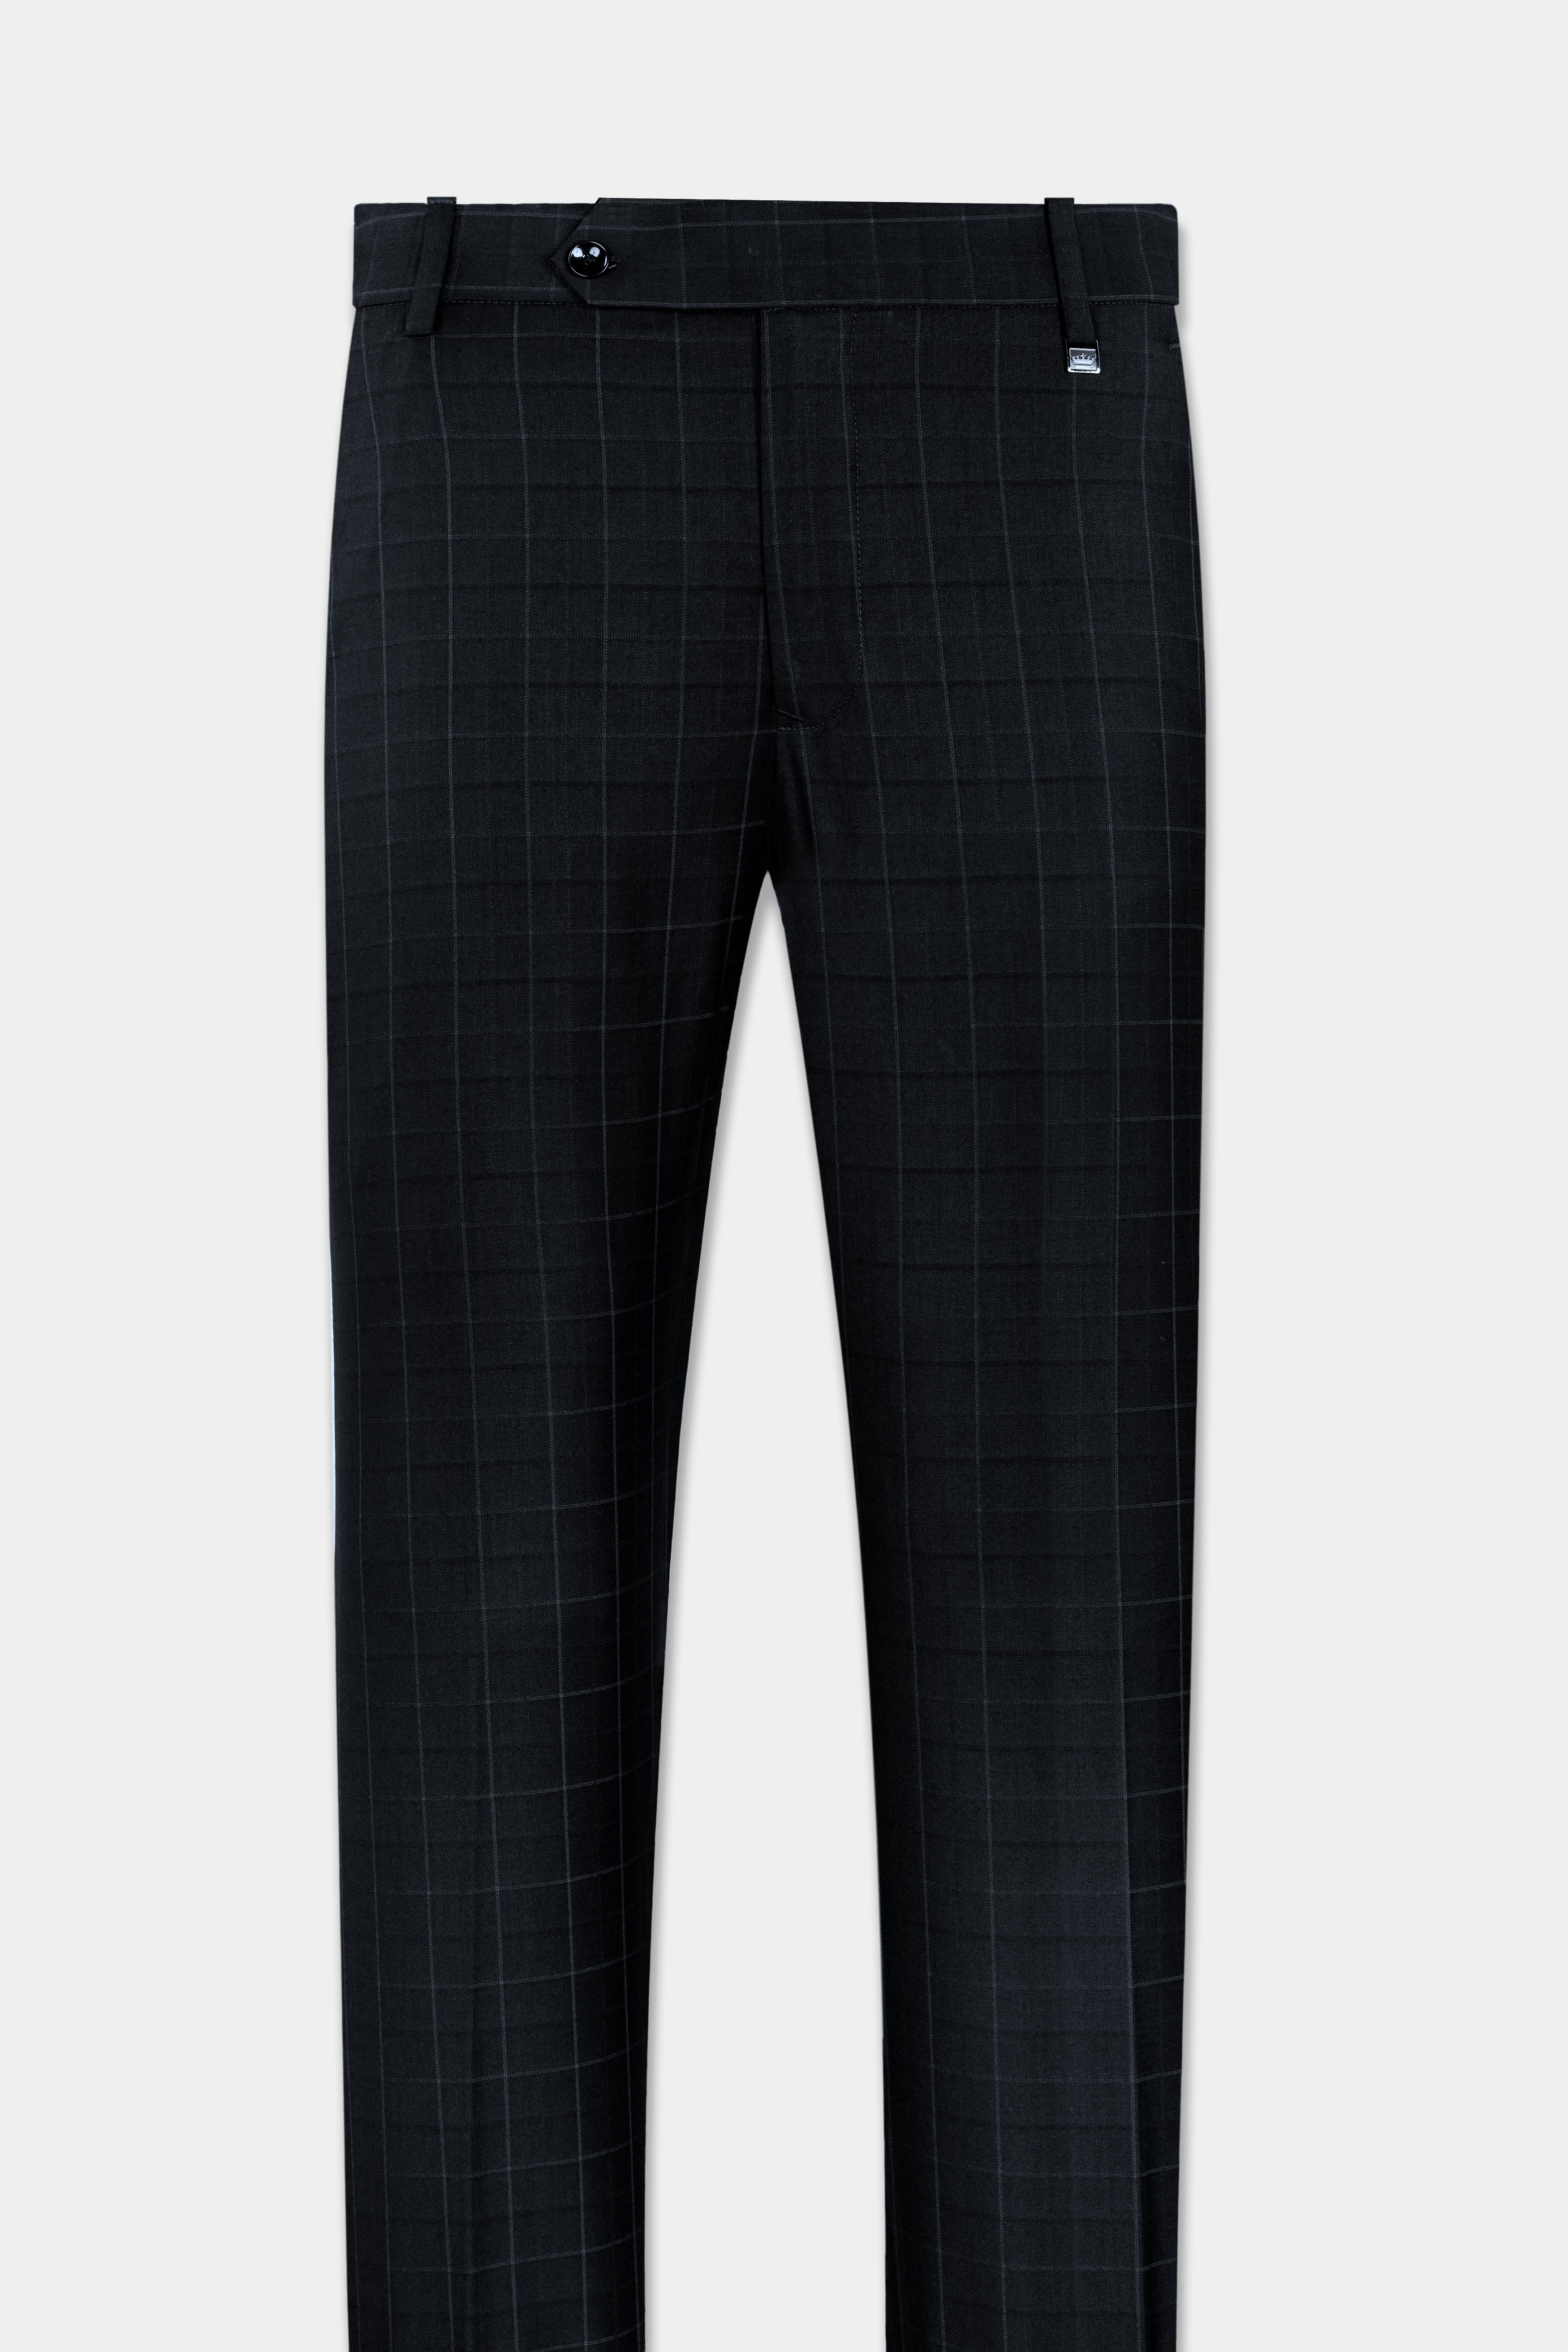 Buy UNITED COLORS OF BENETTON Mens 4 Pocket Checked Trousers | Shoppers Stop